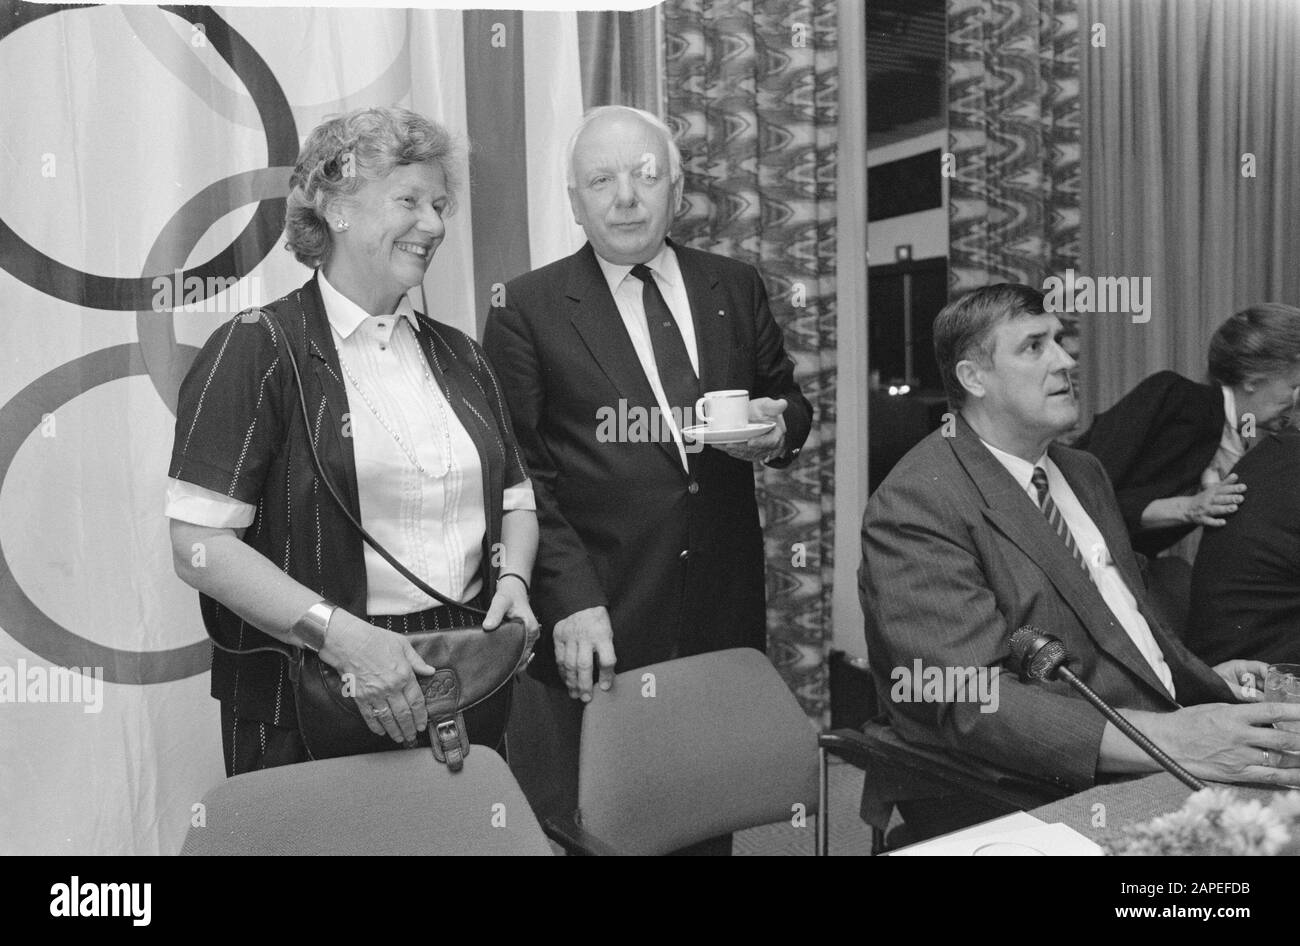 Appointment of the new board of the Dutch Olympic Committee (NOC) in The Hague; v.l.n.r. interim chairman Anneke le le Coultre, the new chairman Koos Idenburg and IOC director Anton Geesink Date: 29 May 1989 Location: The Hague, Zuid-Holland Keywords: appointments, board, committees, chairmen Personal name: Coultre, Anneke le, Geesink, Anton, Idenburg, Koos Stock Photo